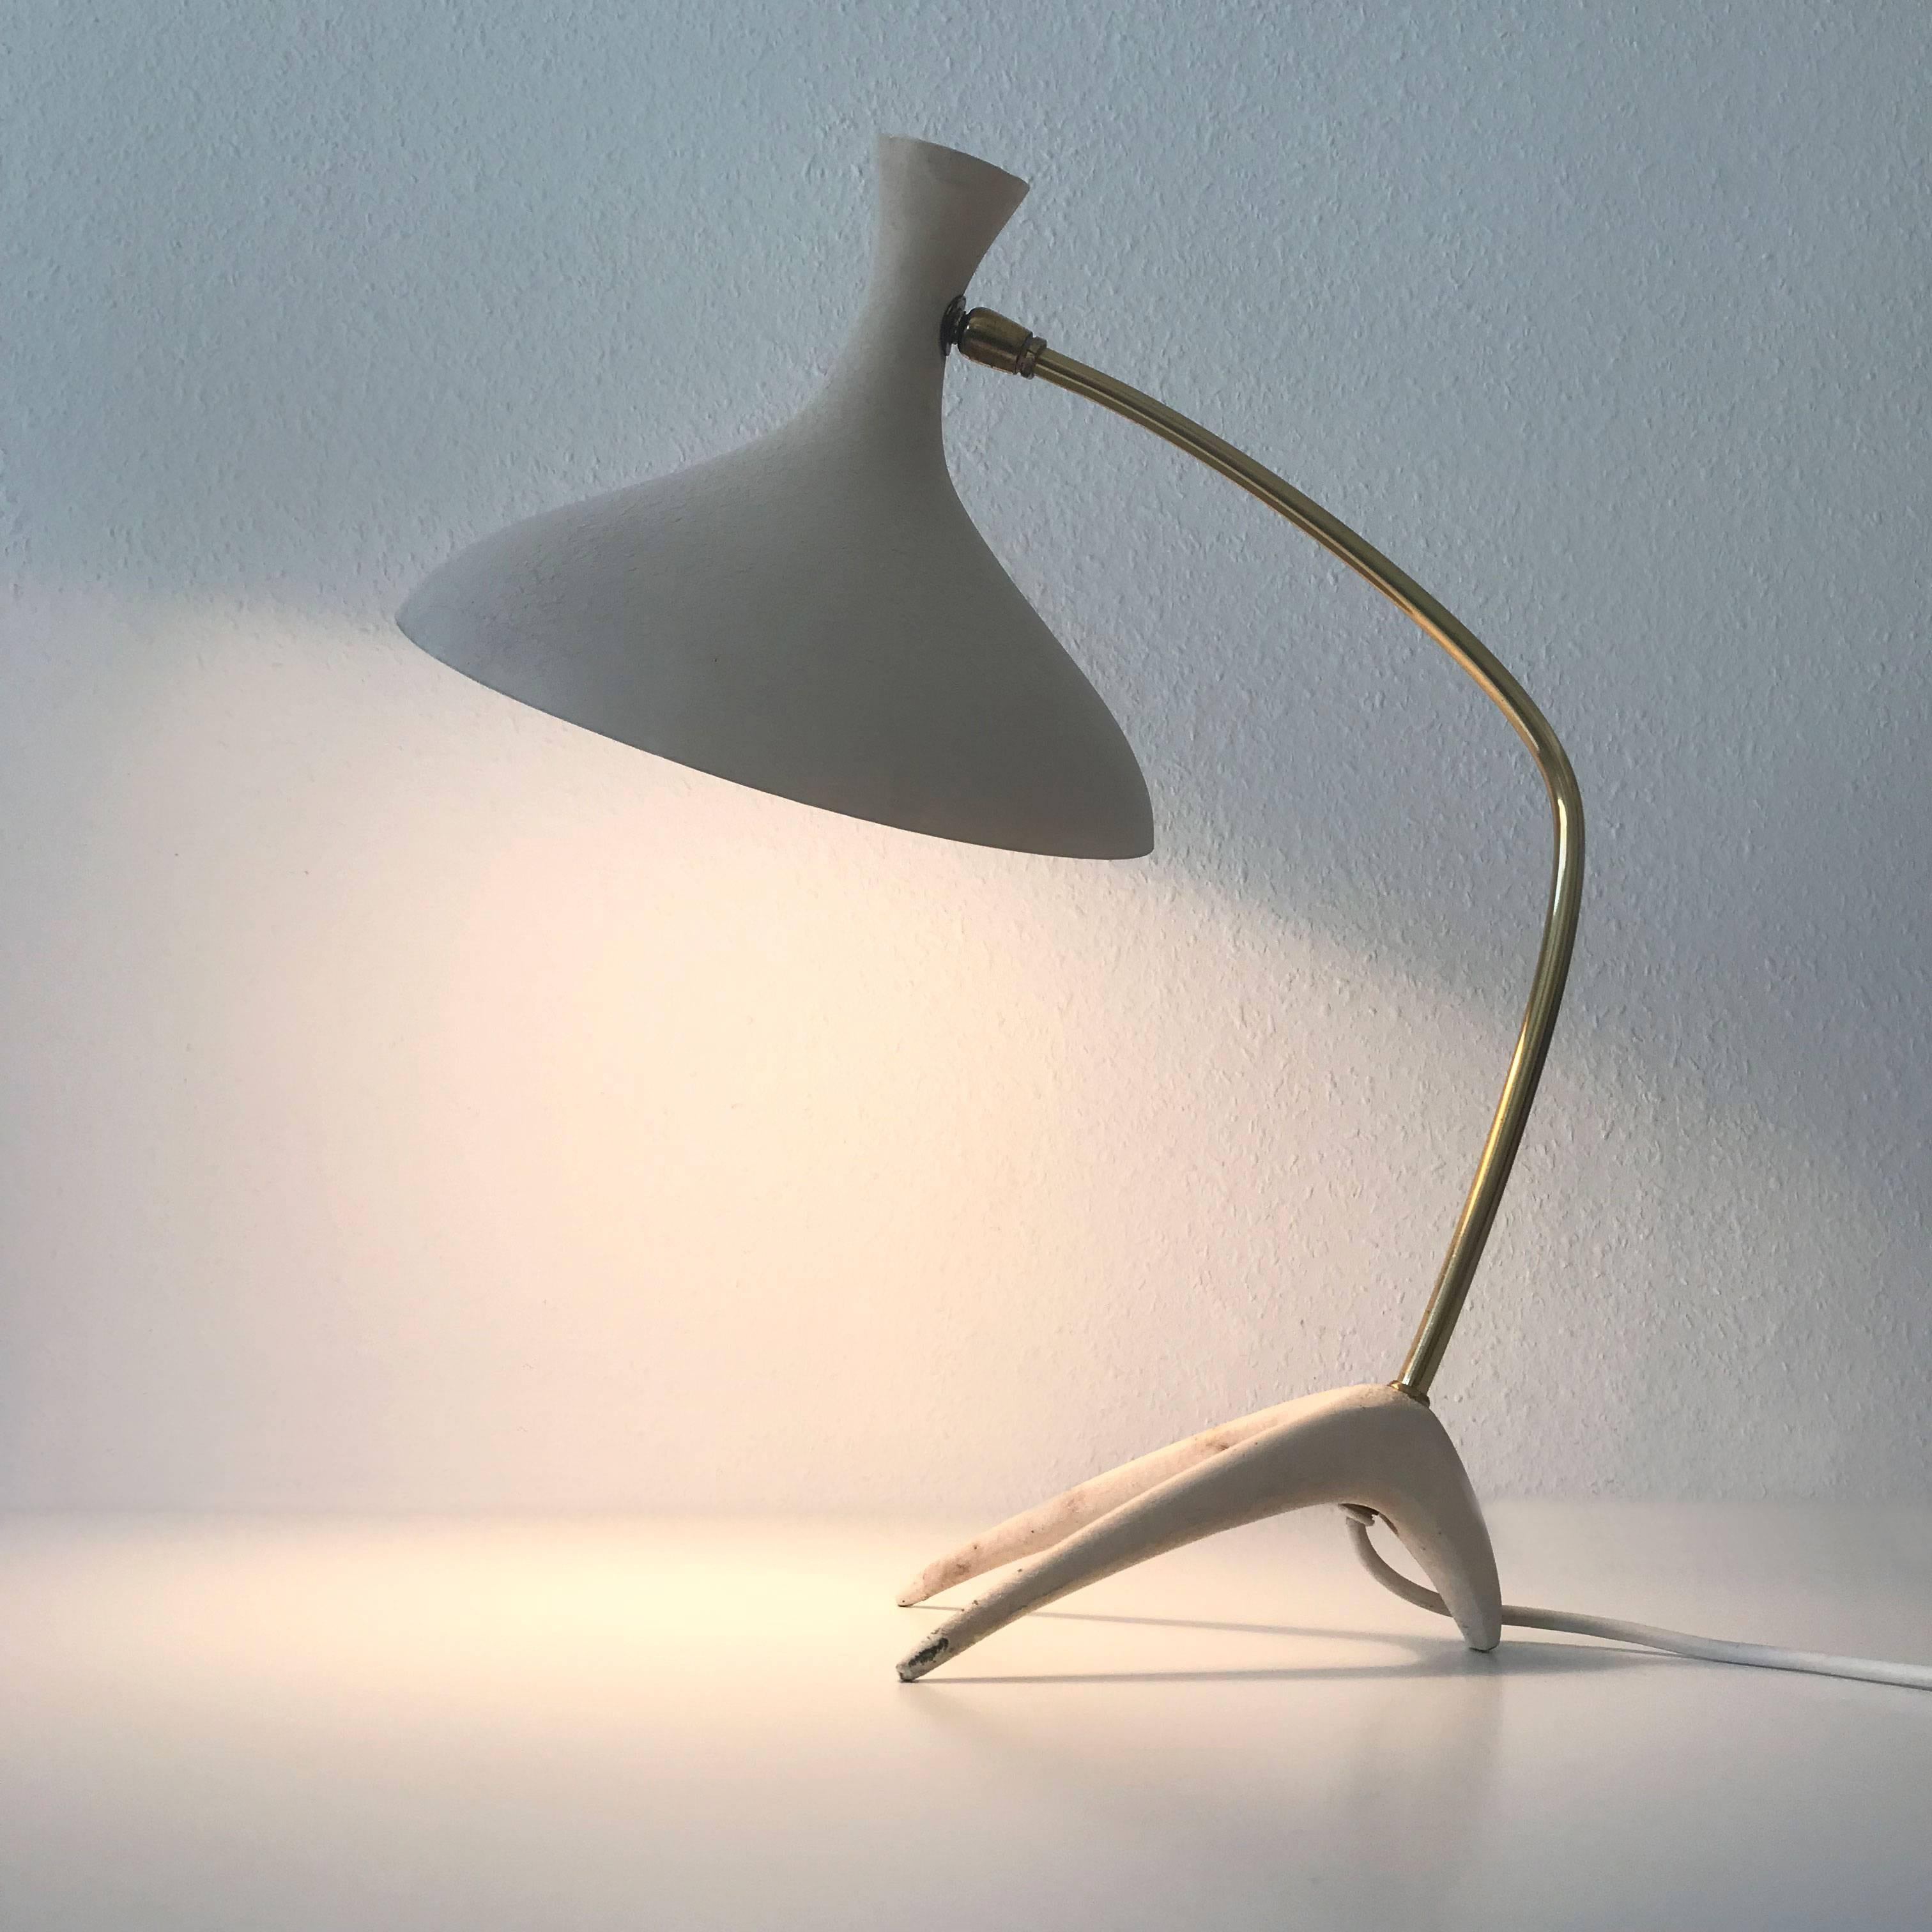 Stunning and rare Mid-Century Modern table lamp with adjustable shade. Designed by Louis Kalff for Gebrüder Cosack, 1950s, Germany.
This elegant table lamp is executed in brass, in crème-white lacquered aluminium and cast metal base.
It is